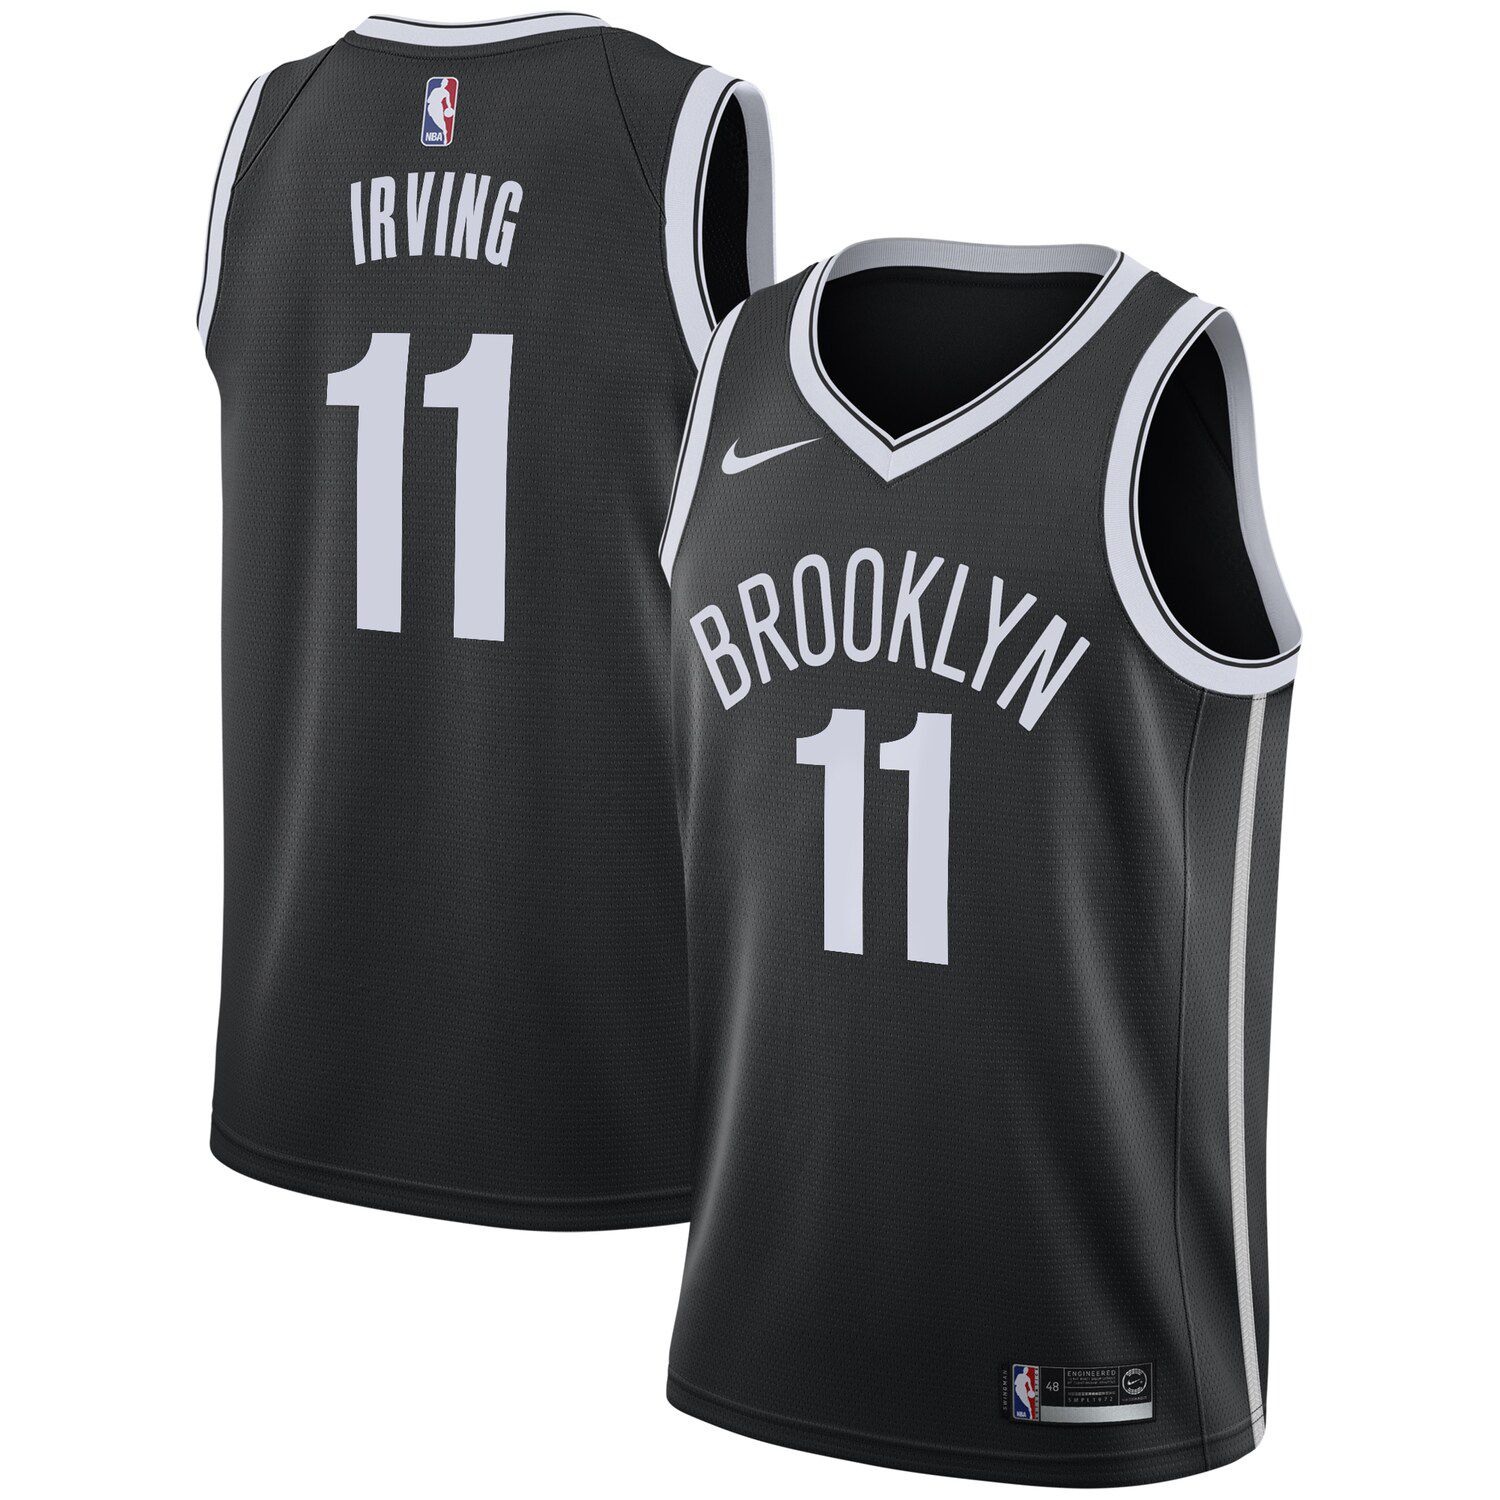 kyrie irving's jersey